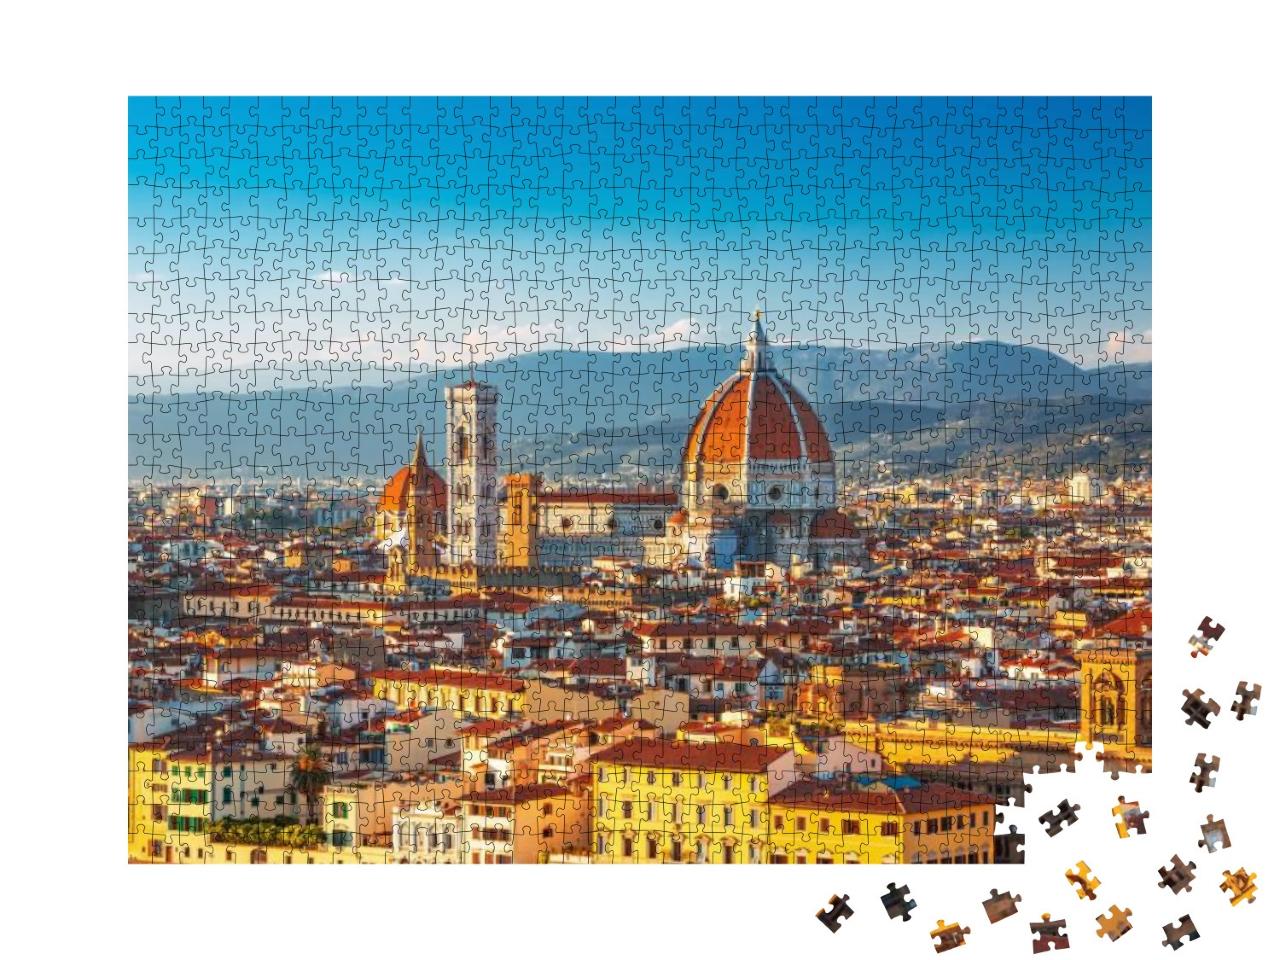 Beautiful View on Hart of Amazing Florence City & the Cat... Jigsaw Puzzle with 1000 pieces